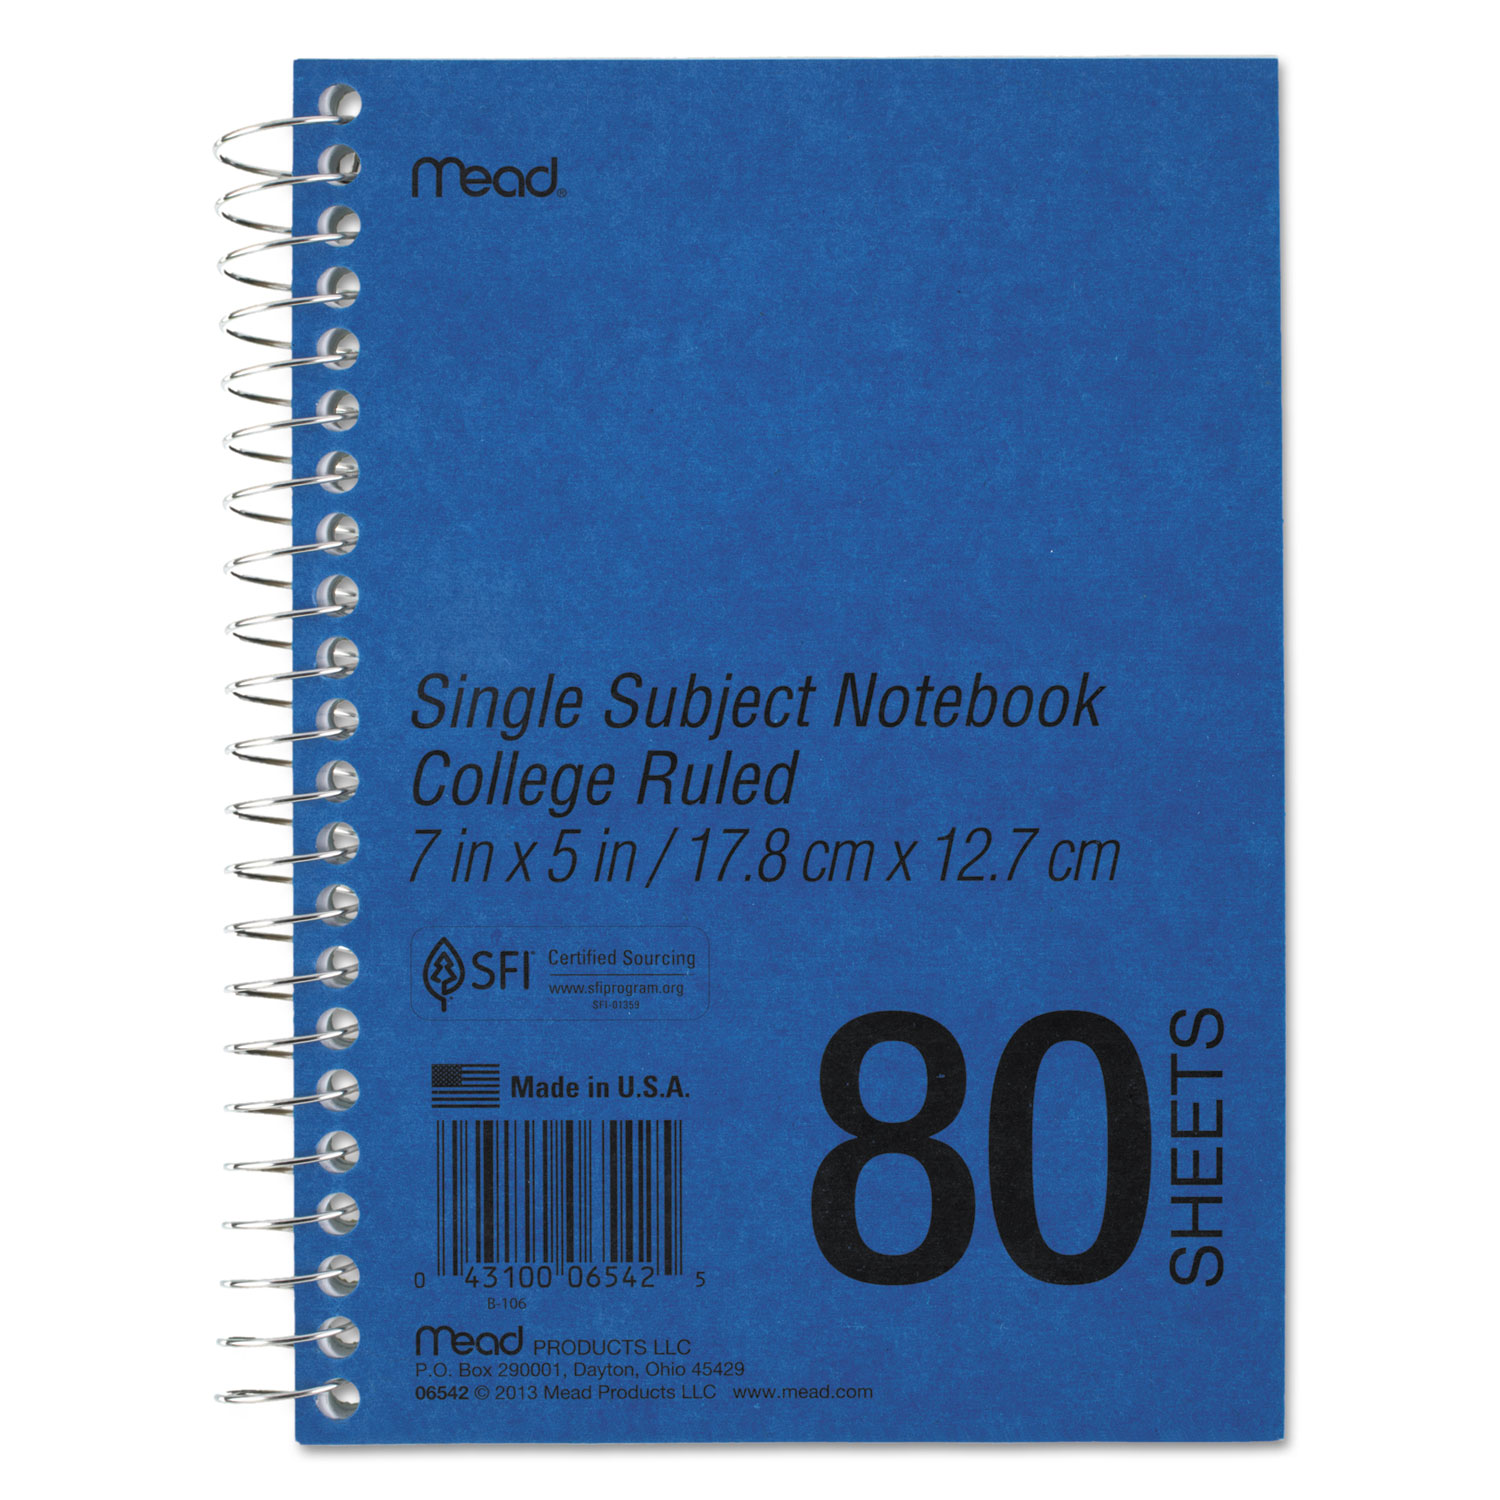  Mead 06542 DuraPress Cover Notebook, 1 Subject, Medium/College Rule, Blue Cover, 7 x 5, 80 Sheets (MEA06542) 